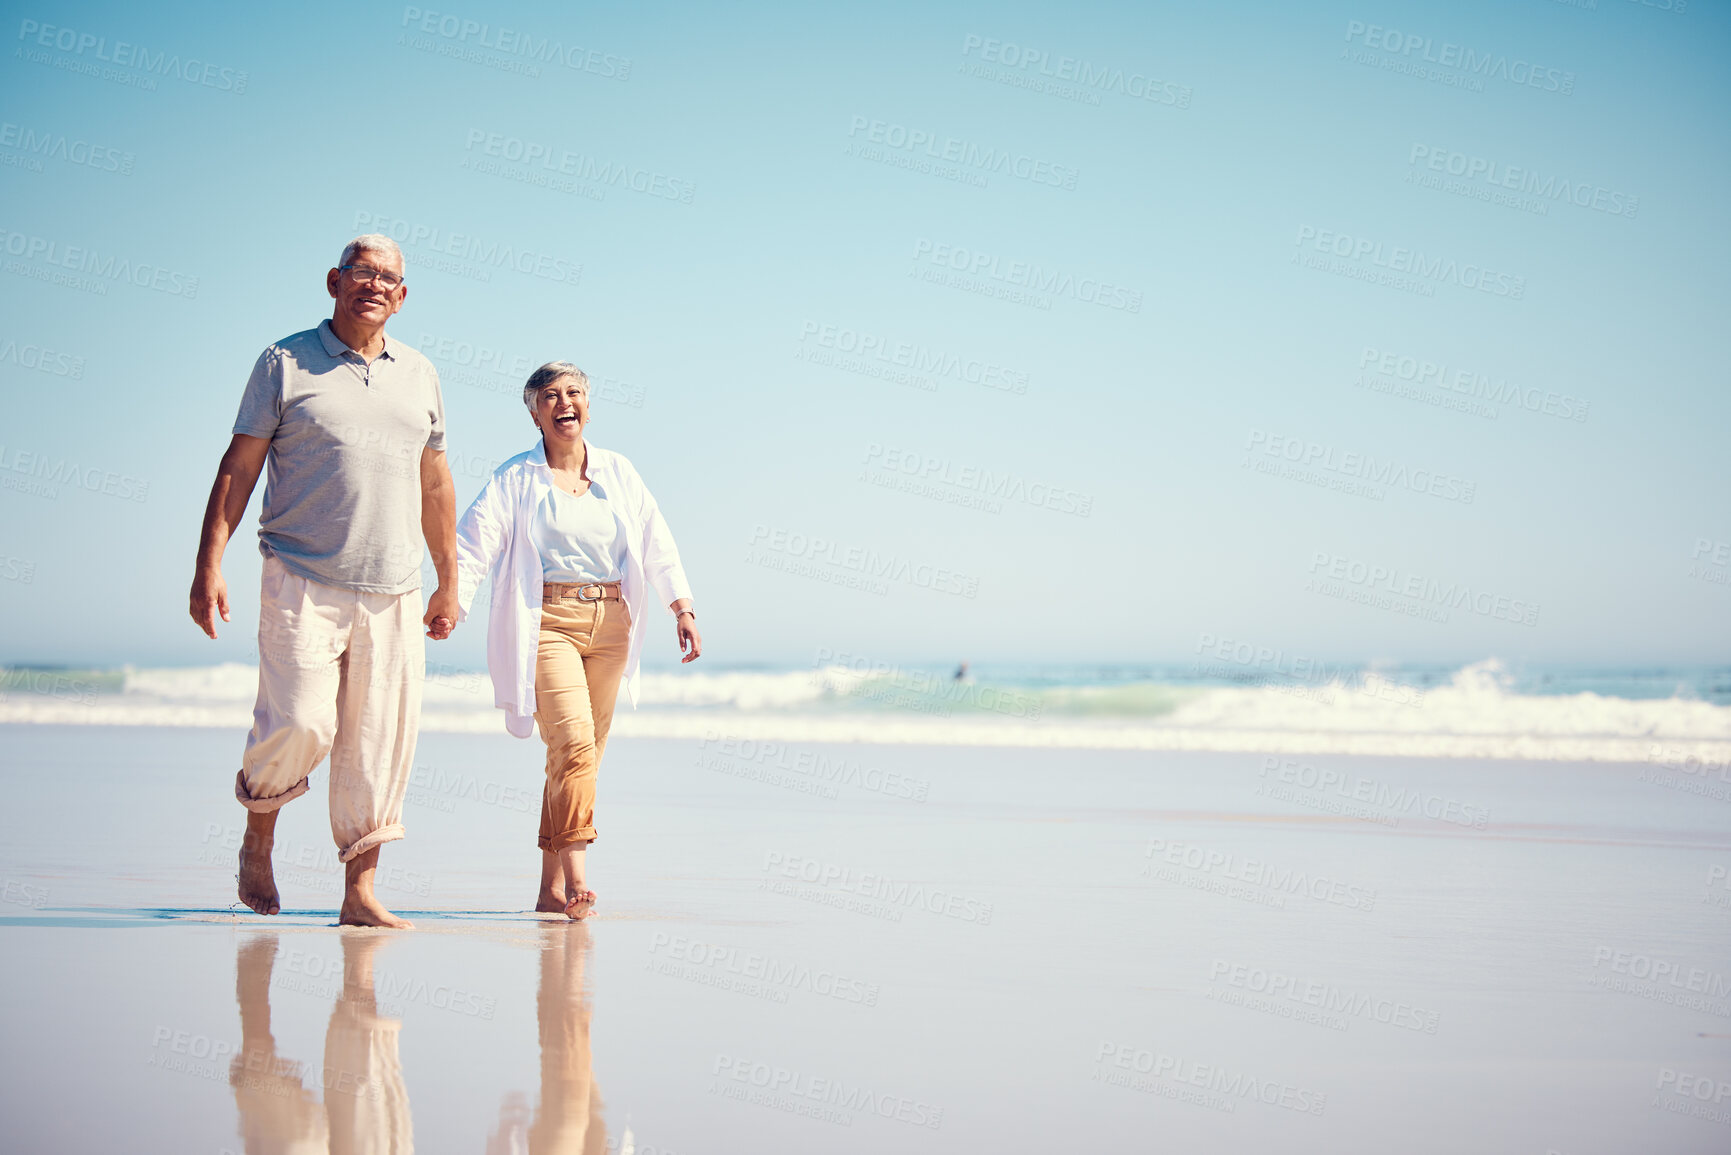 Buy stock photo Holding hands, summer and an old couple walking on the beach with a blue sky mockup background. Love, romance or mock up with a senior man and woman taking a walk on the sand by the ocean or sea